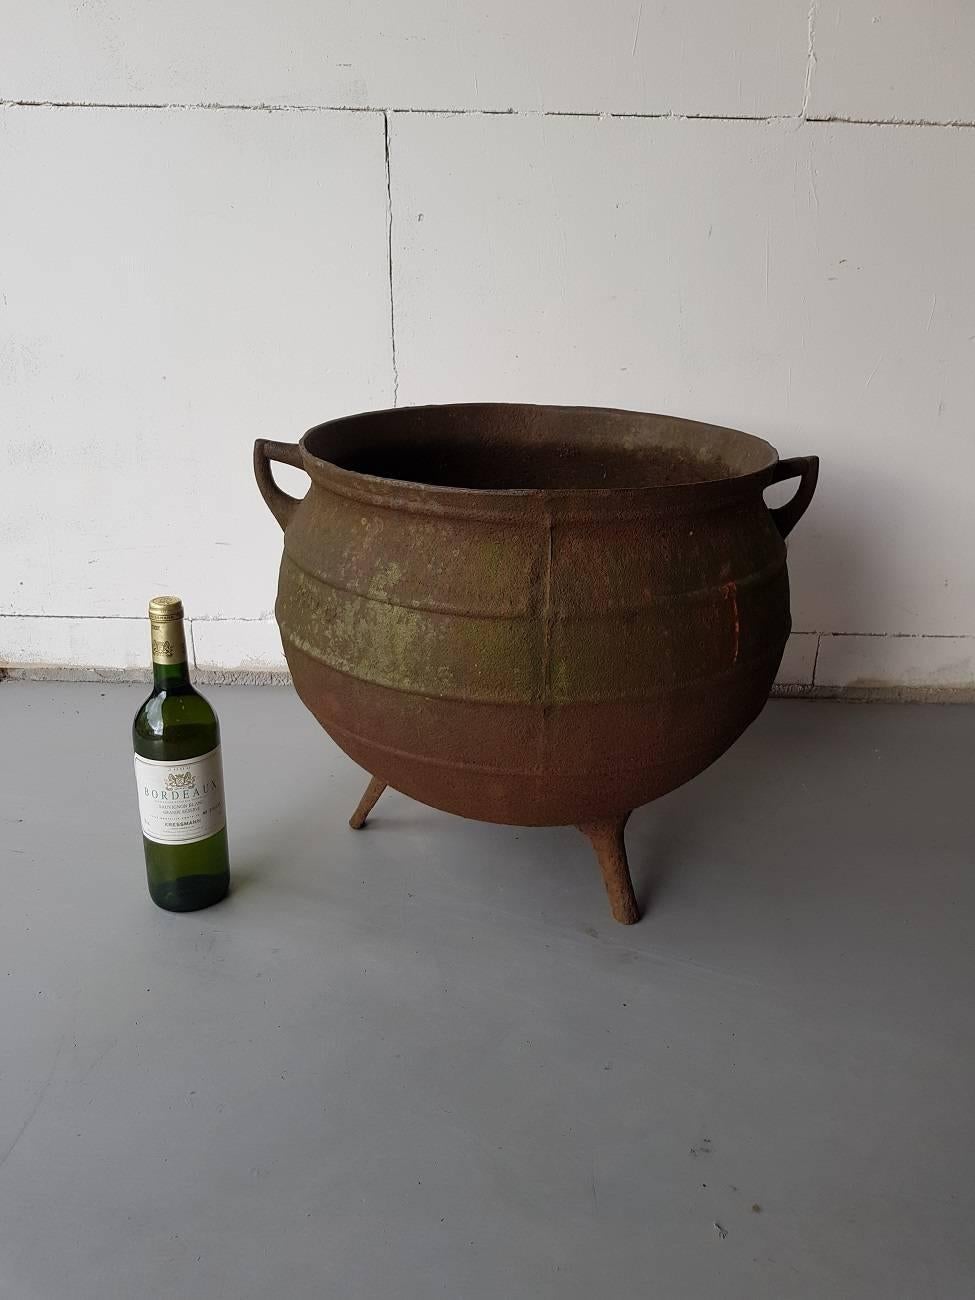 Old and large cast iron witches cauldron or kettle with two ears and standing on three legs and is made circa 1900 with the founders name but unclear.

The measurements are:
Depth 45 cm/ 17.7 inch.
Width 45 cm/ 17.7 inch.
Height 43 cm/ 16.9